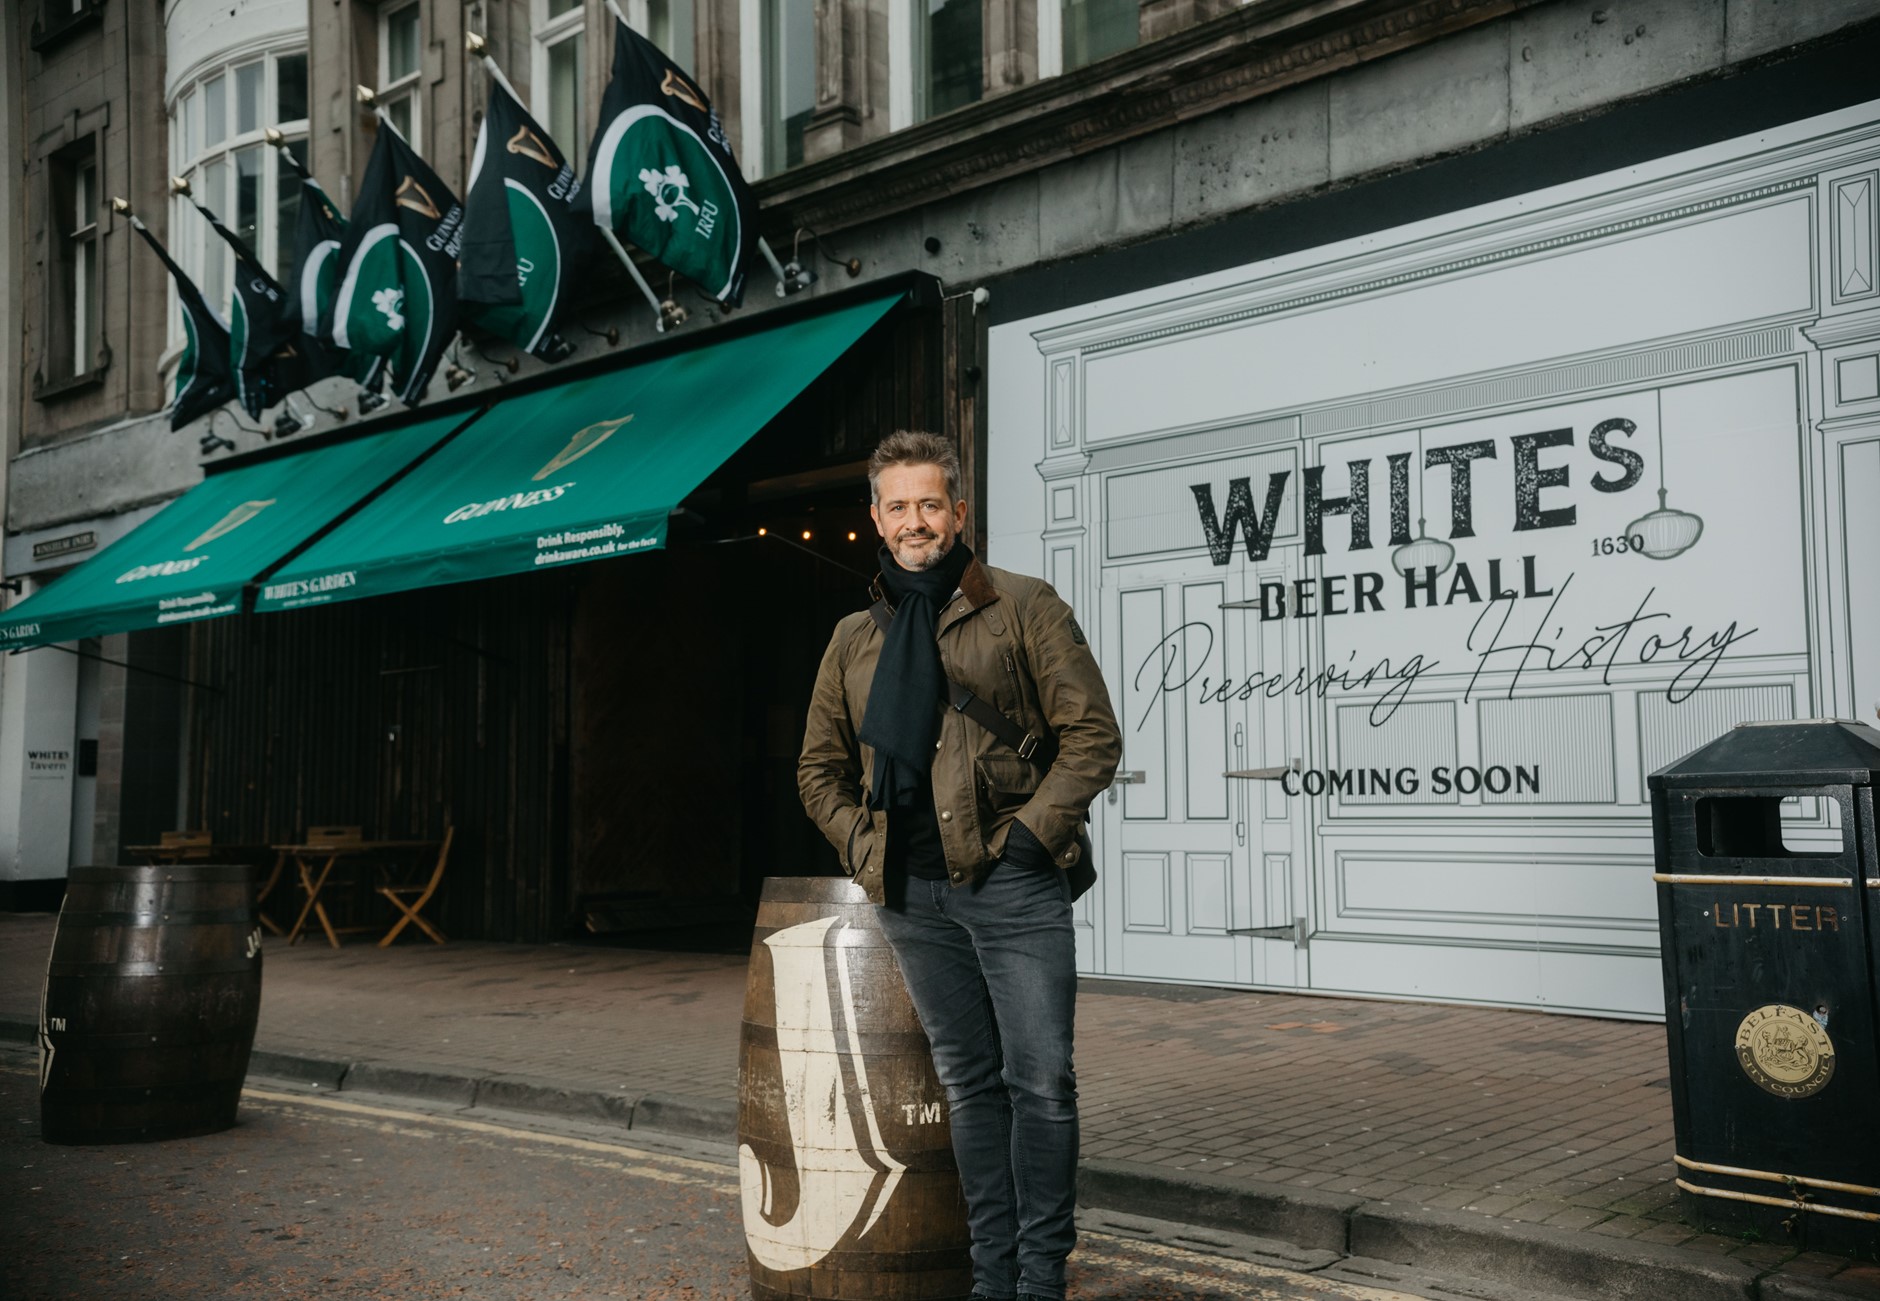 £1.5m investment to create 50 jobs at White’s Tavern